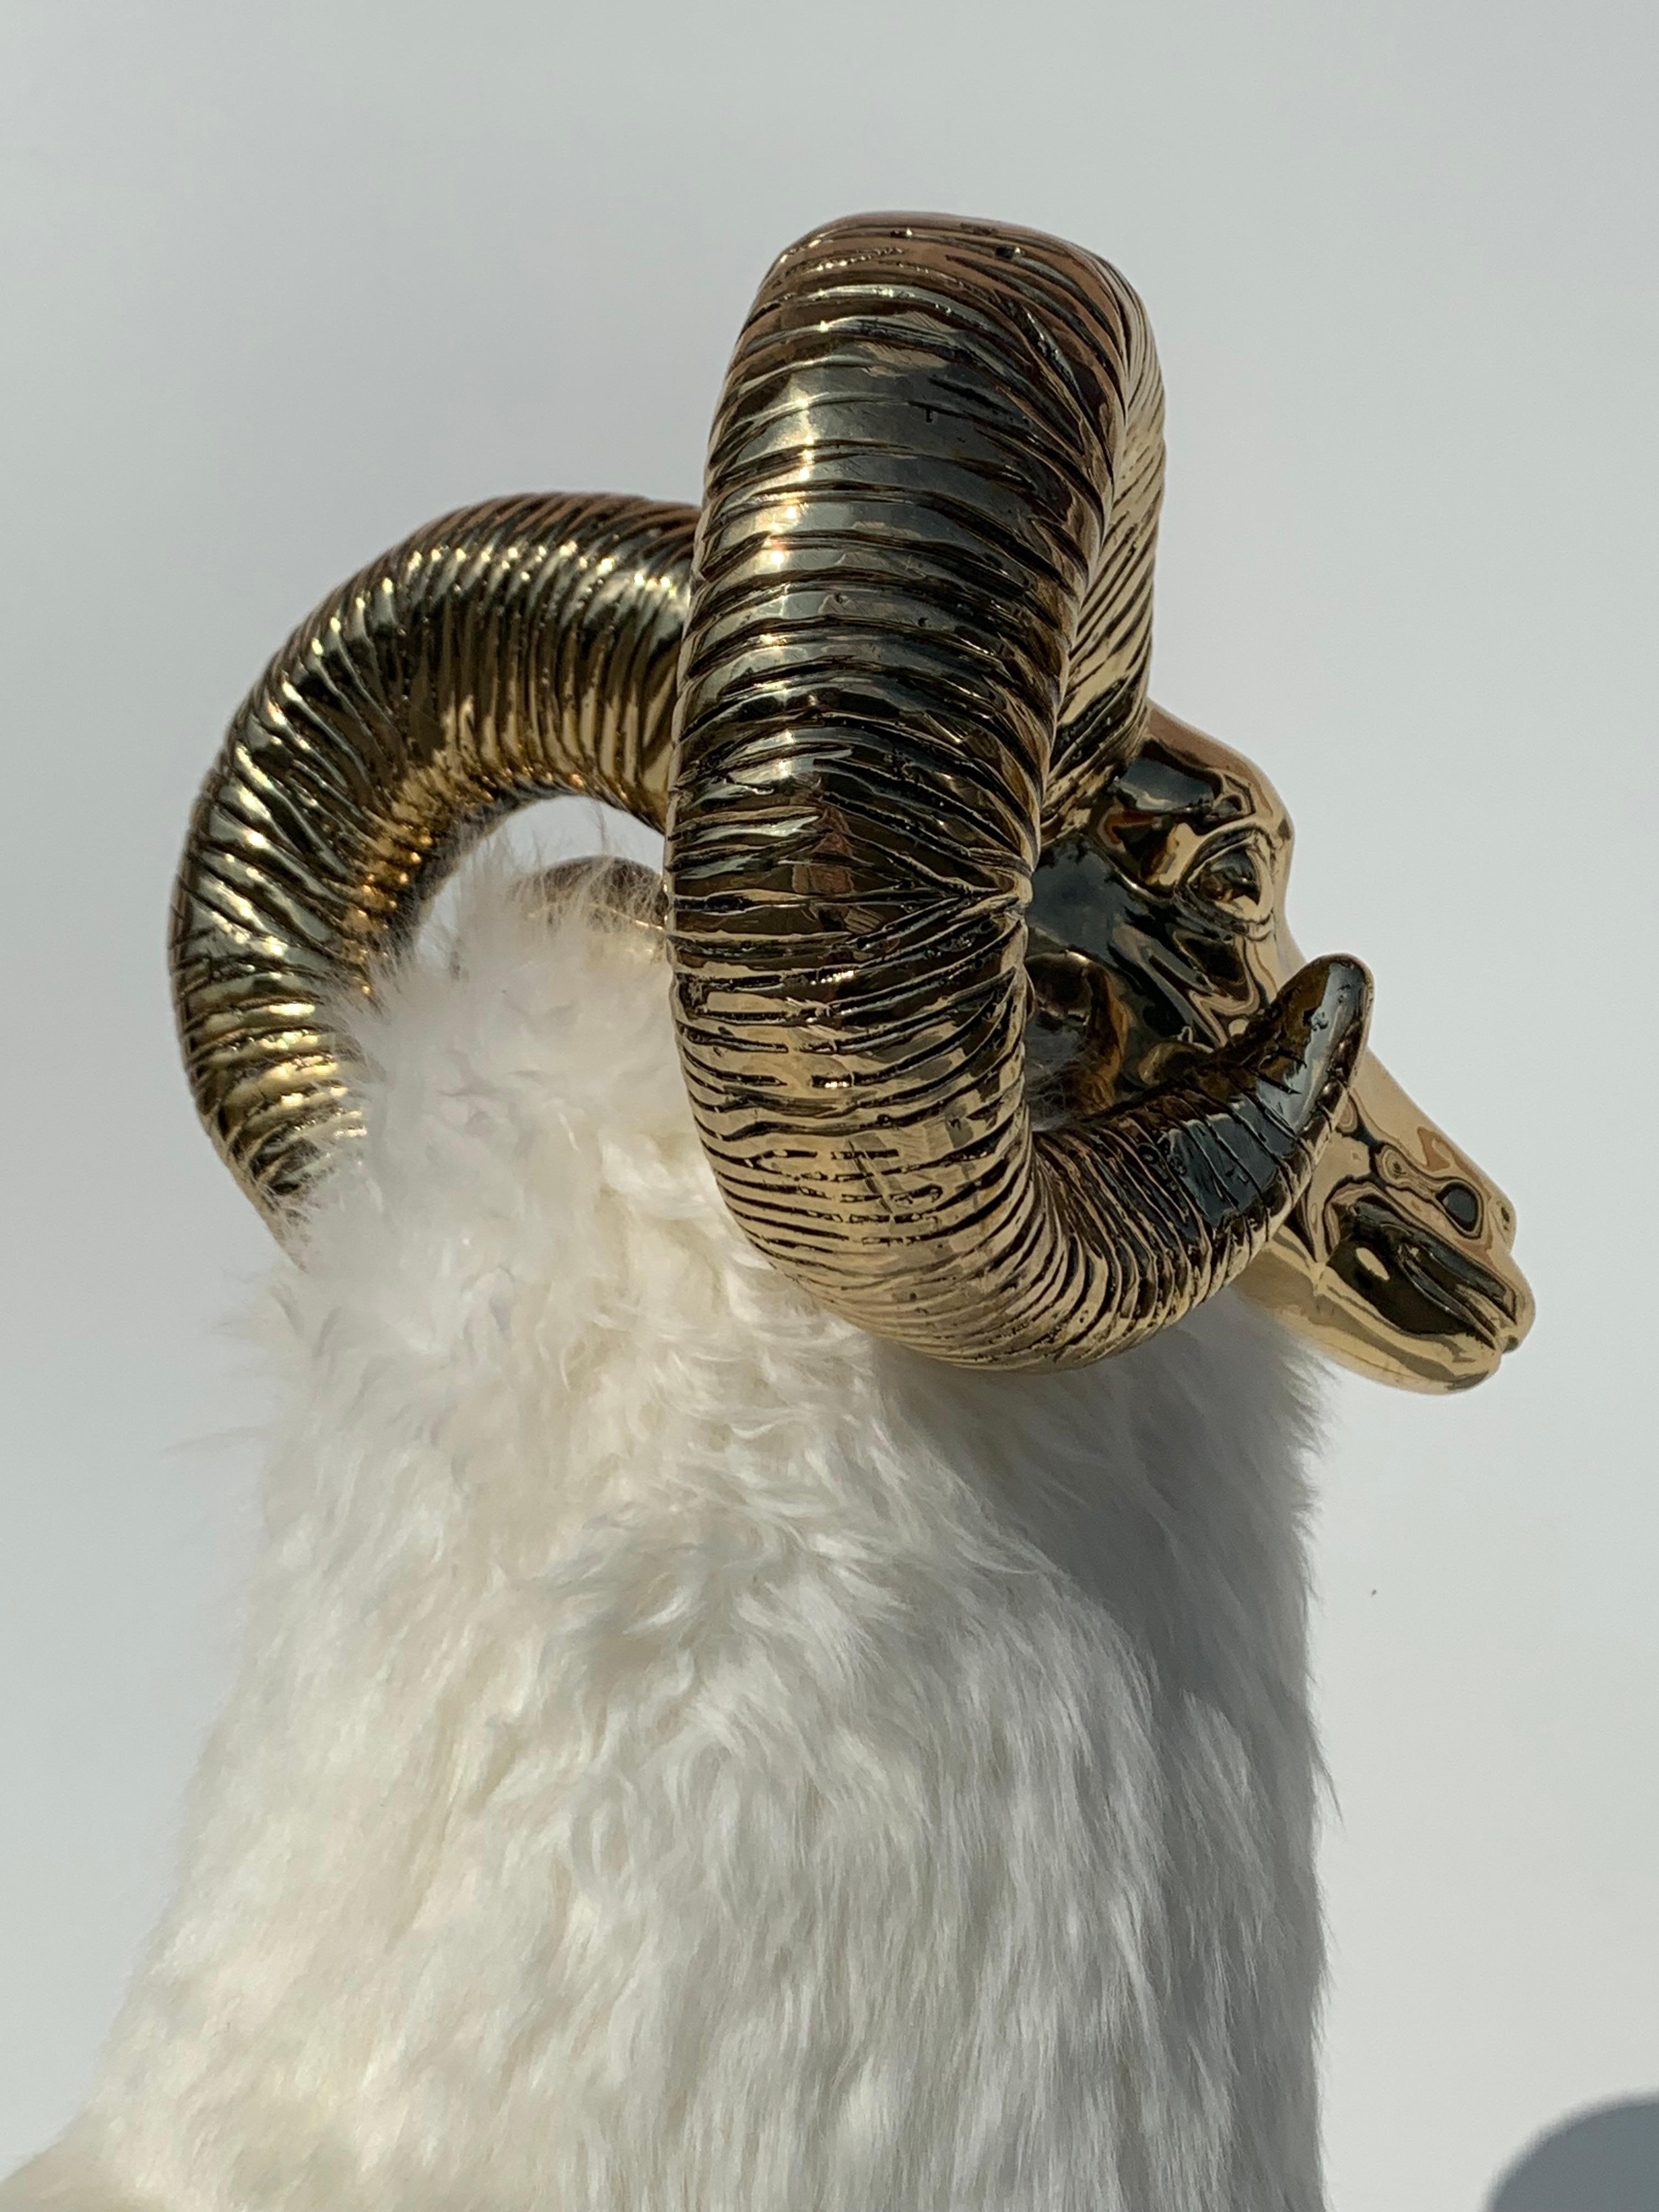 Polished Brass Ram or Sheep Sculpture 2